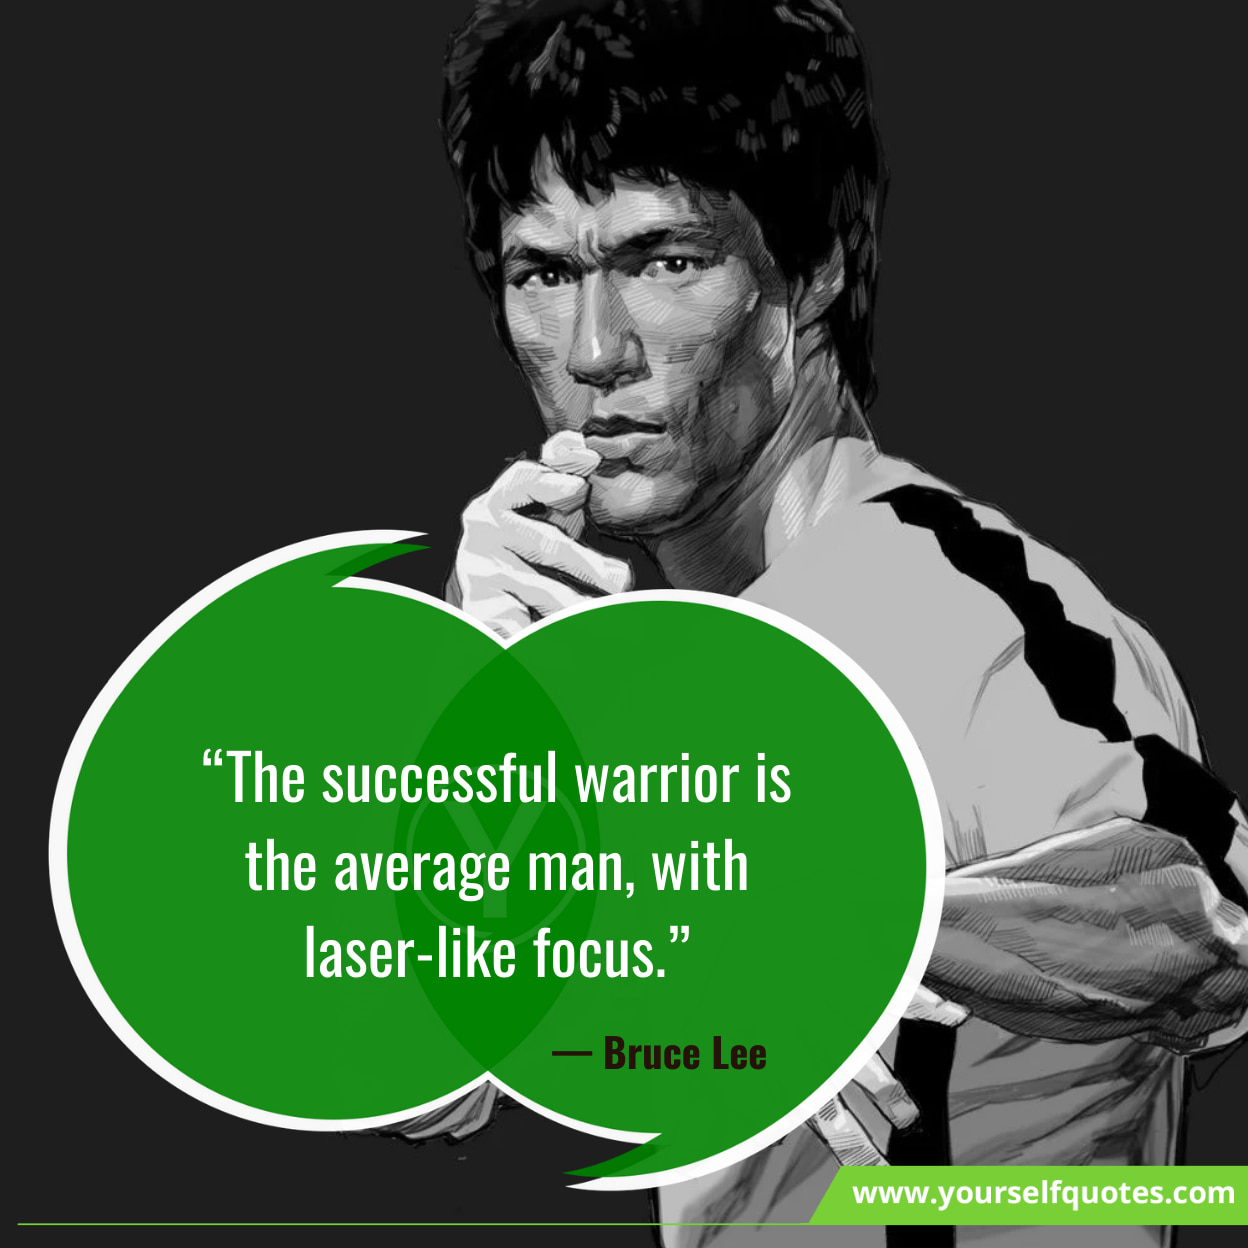 Stay Focused Quotes On Success